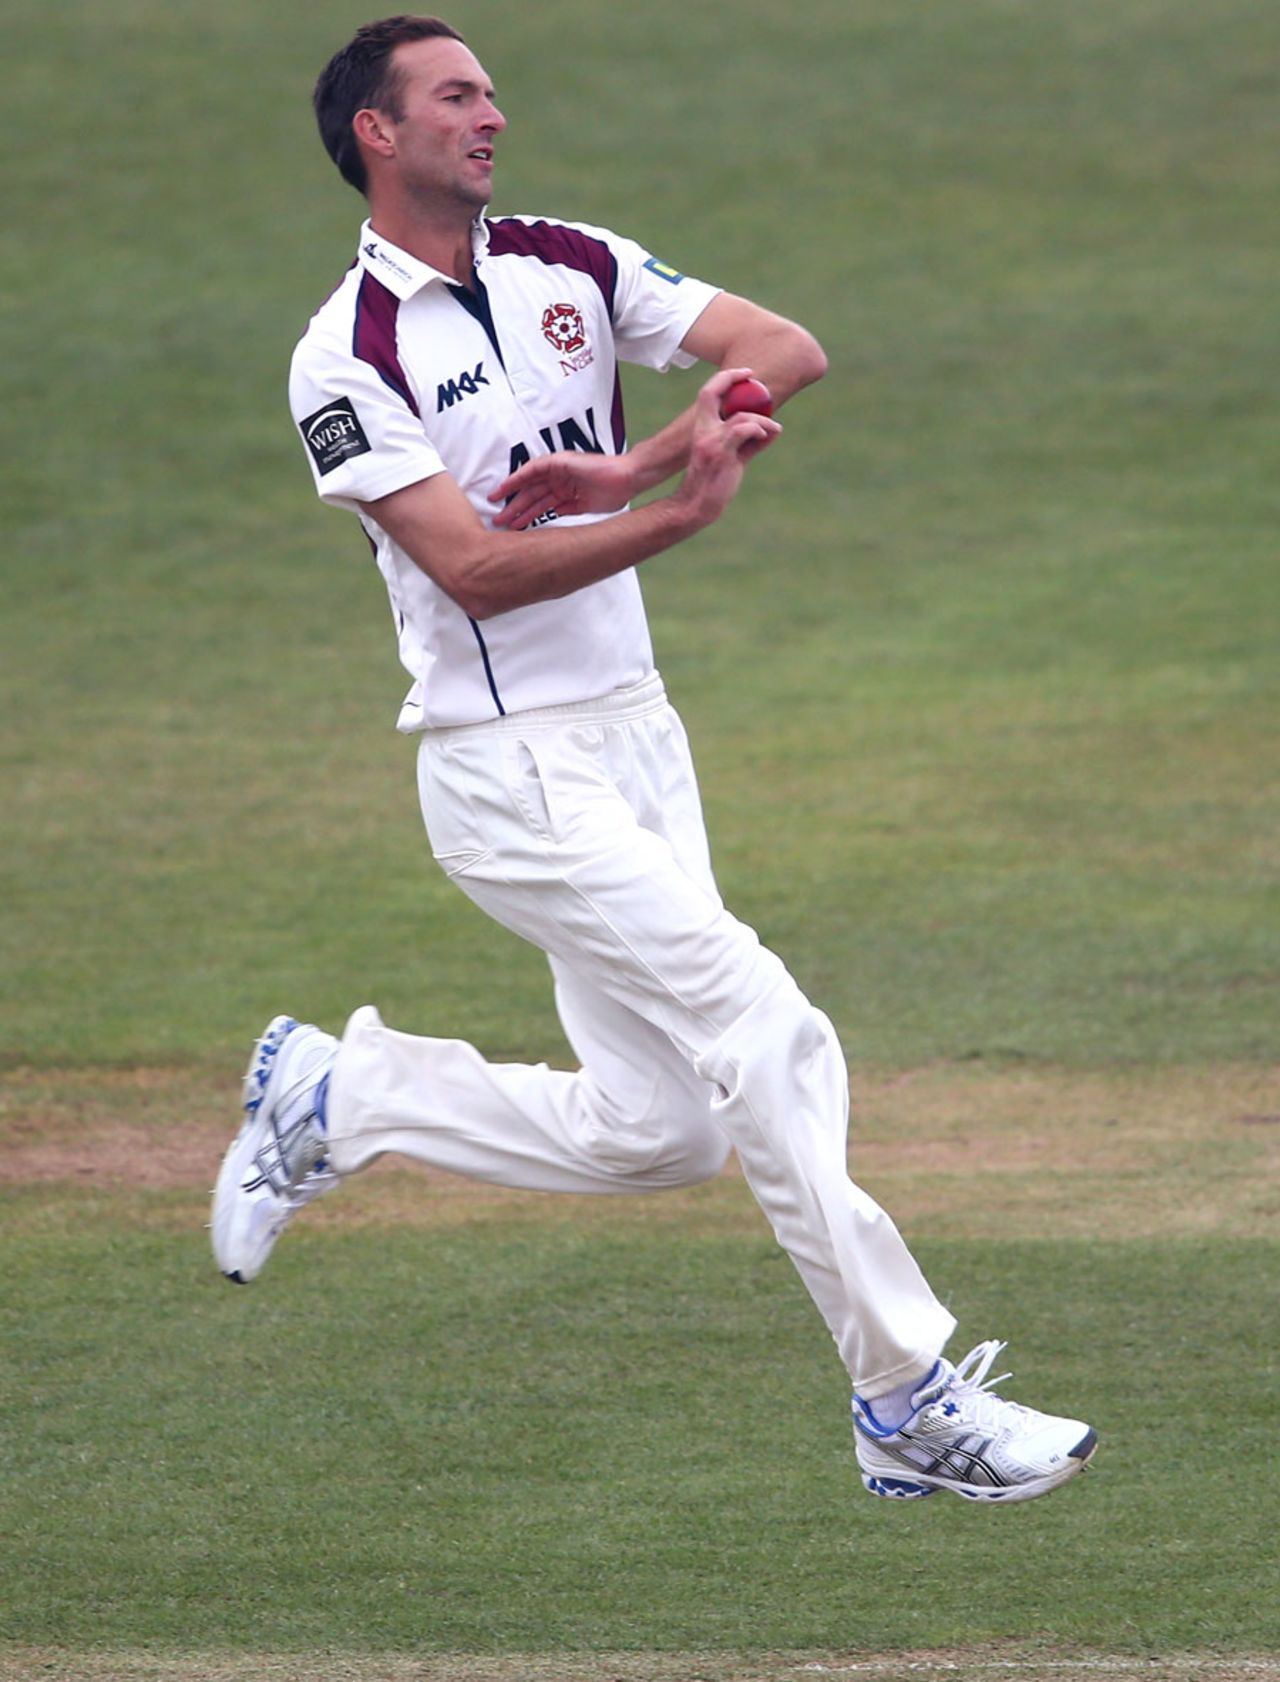 Trent Copeland runs into bowl on debut, Glamorgan v Northamptonshire, County Championship, Division Two, Cardiff, 1st day, April 10, 2013